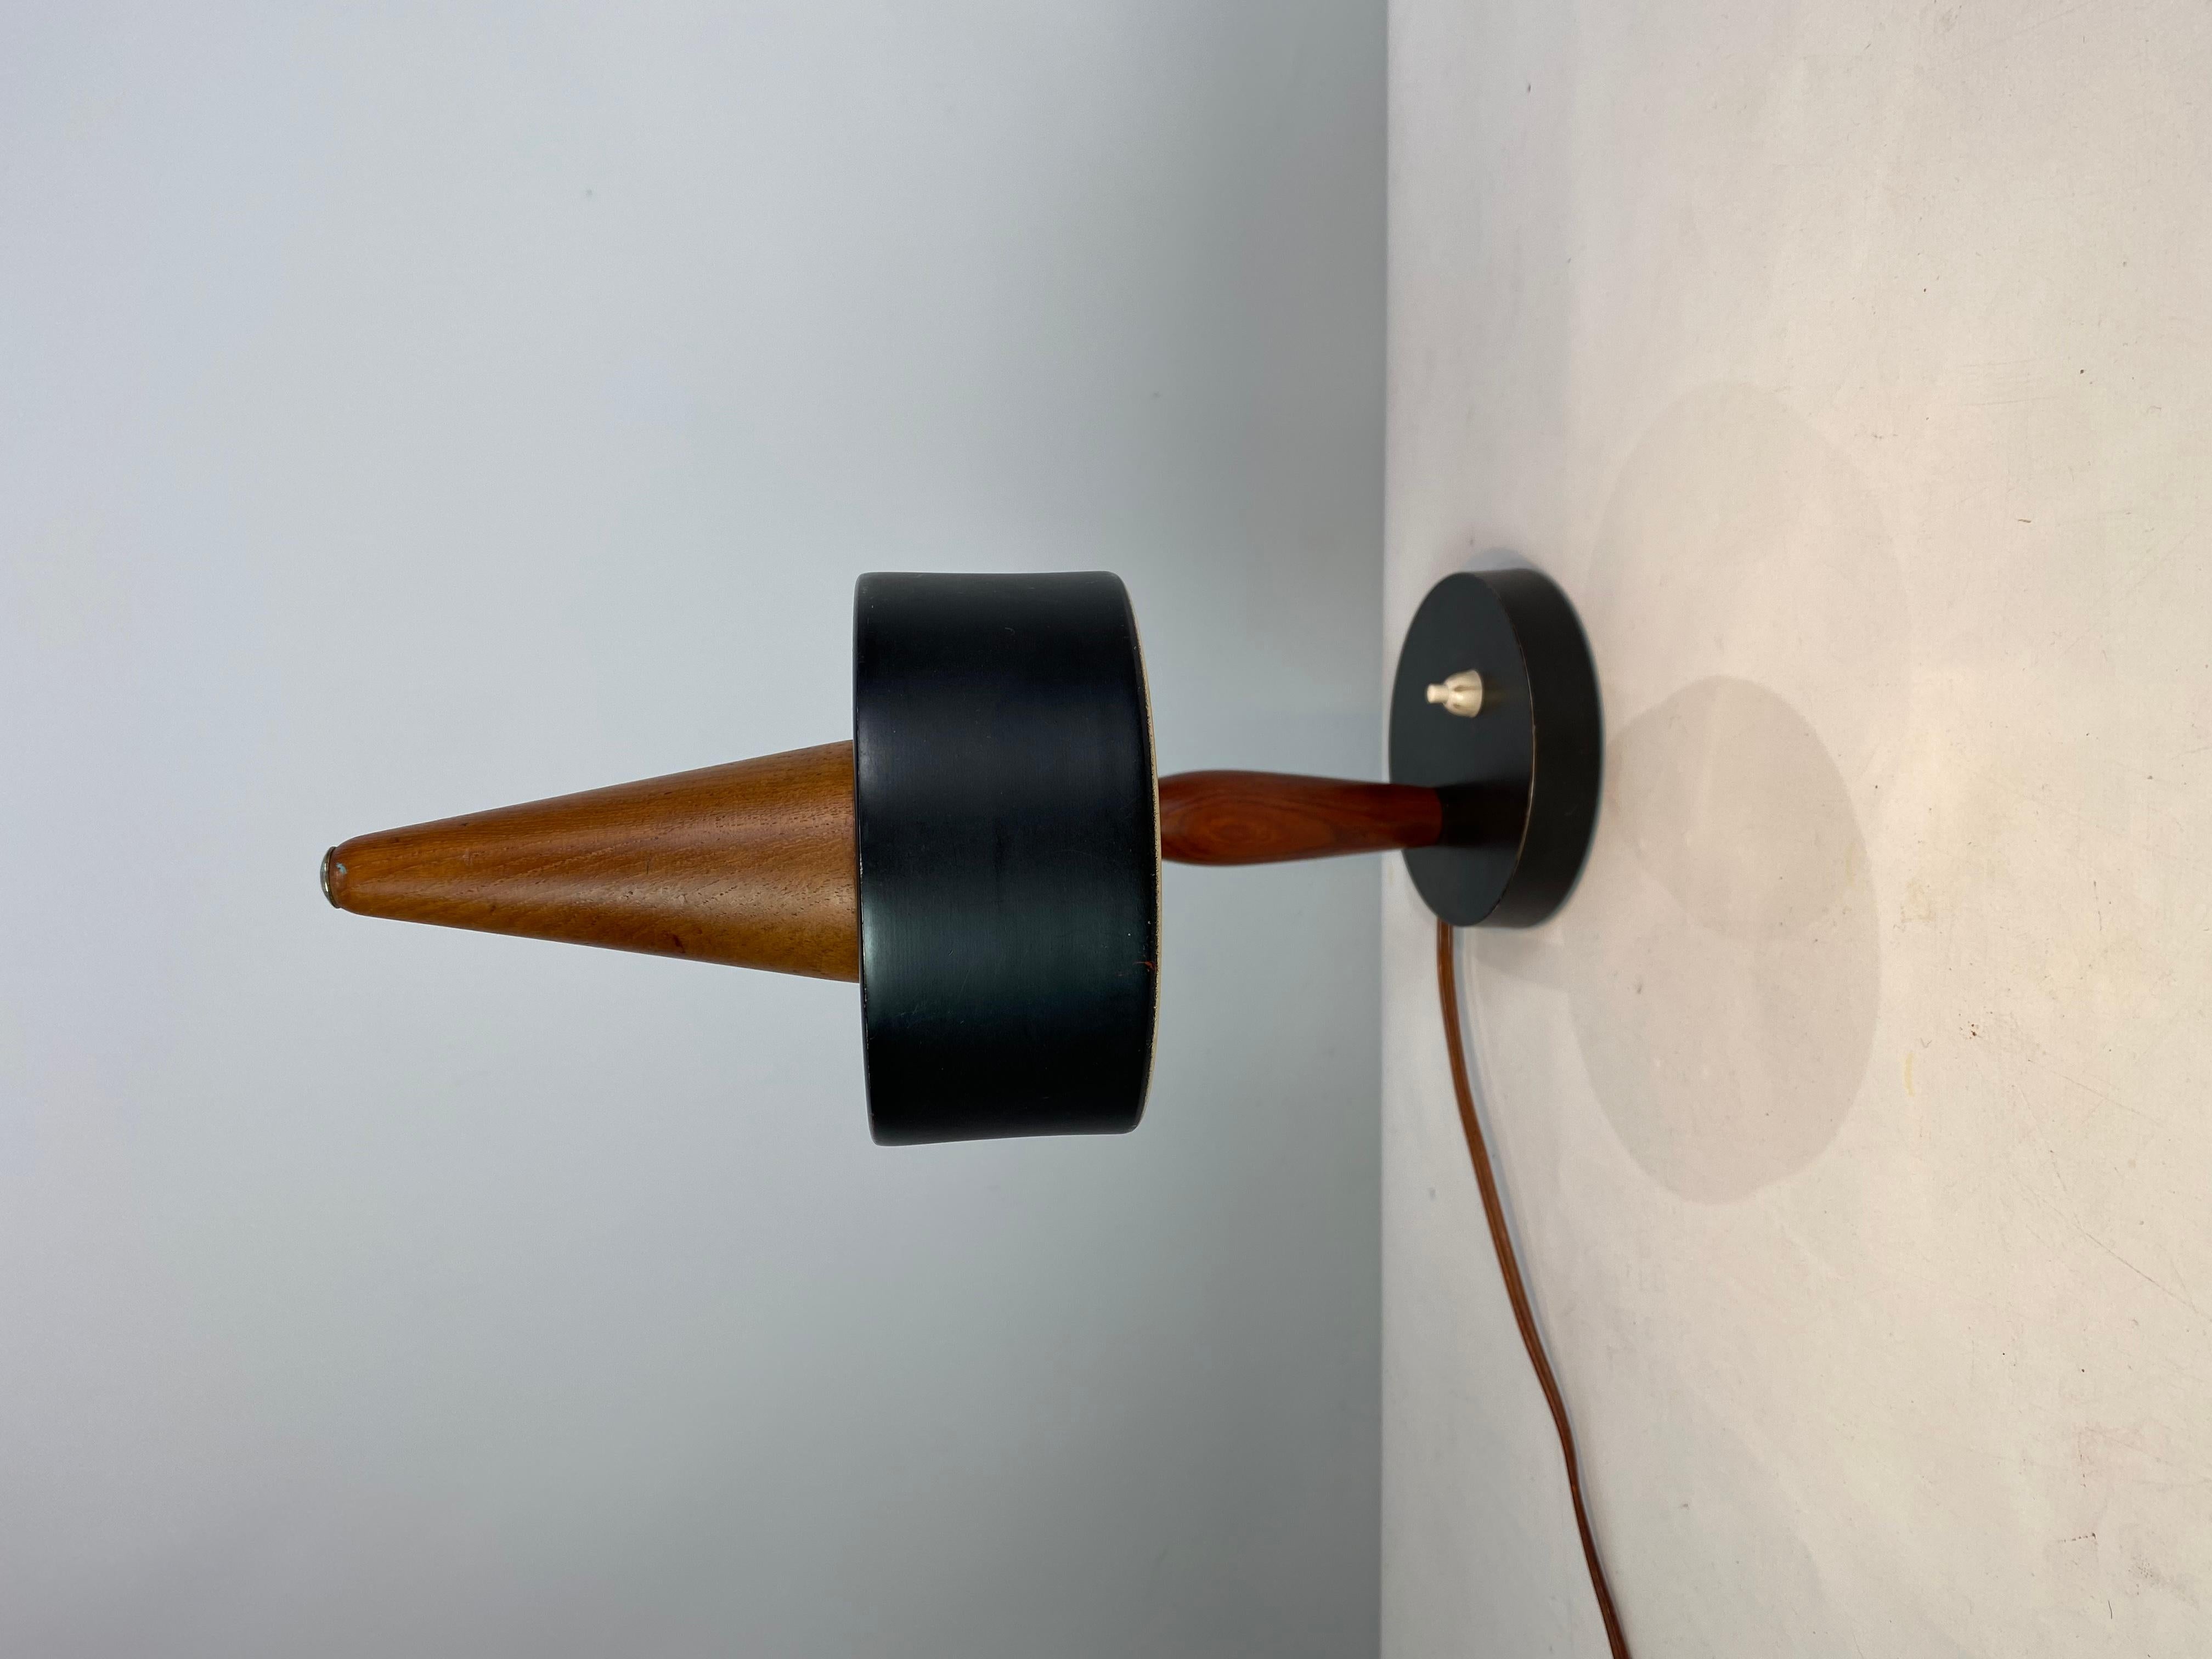 Table Lamp of Black Metal and Teak of Danish Design from the 1960s For Sale 1